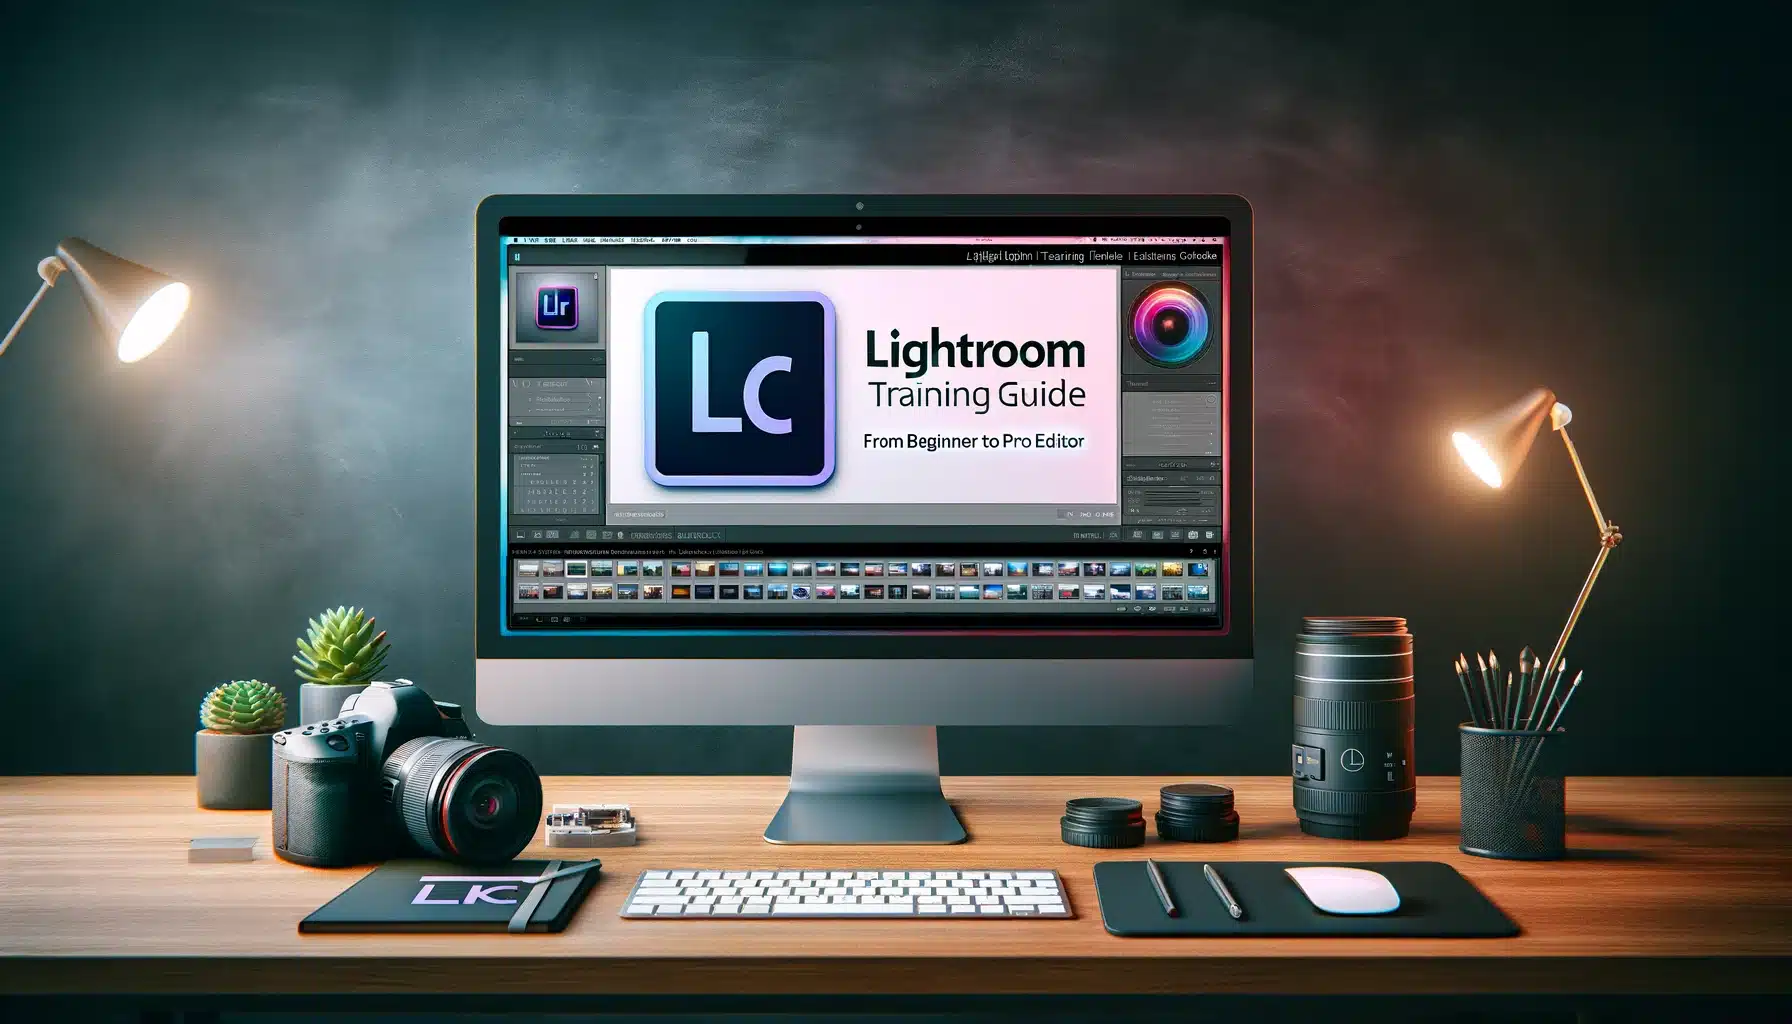 Desktop computer in a professional workspace showing Adobe Lightroom's interface for a training guide, with photography equipment and editing notes on the desk.